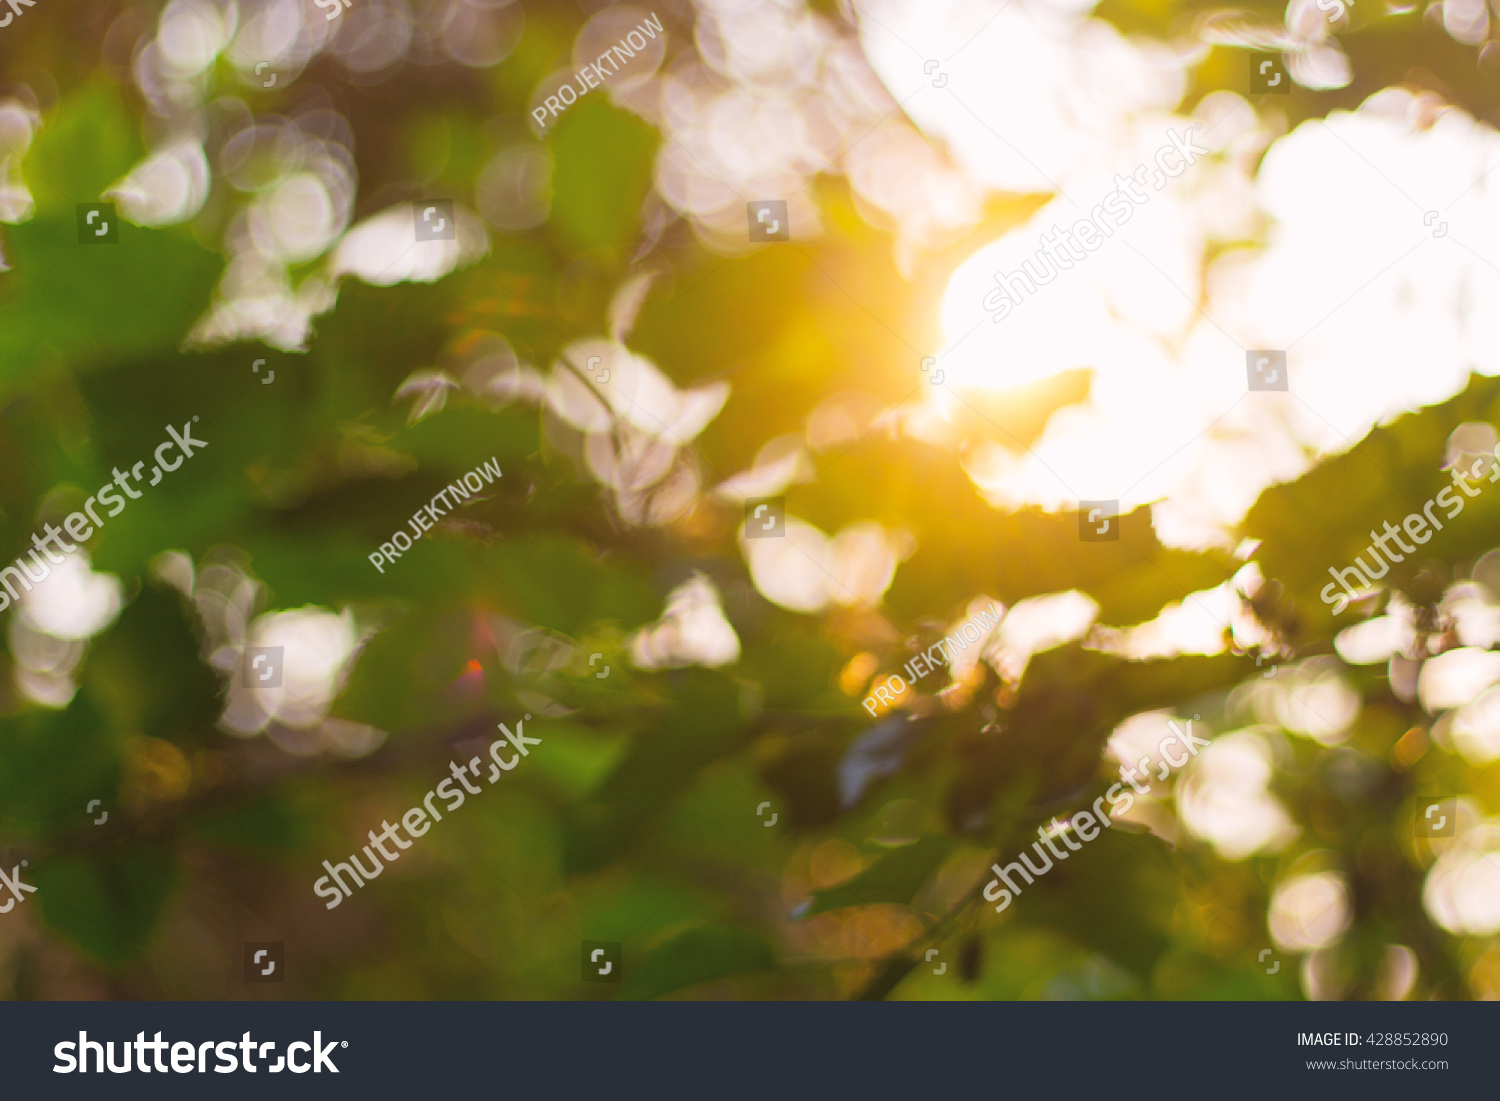 588 Dappled sunlight through leaves Images, Stock Photos & Vectors ...